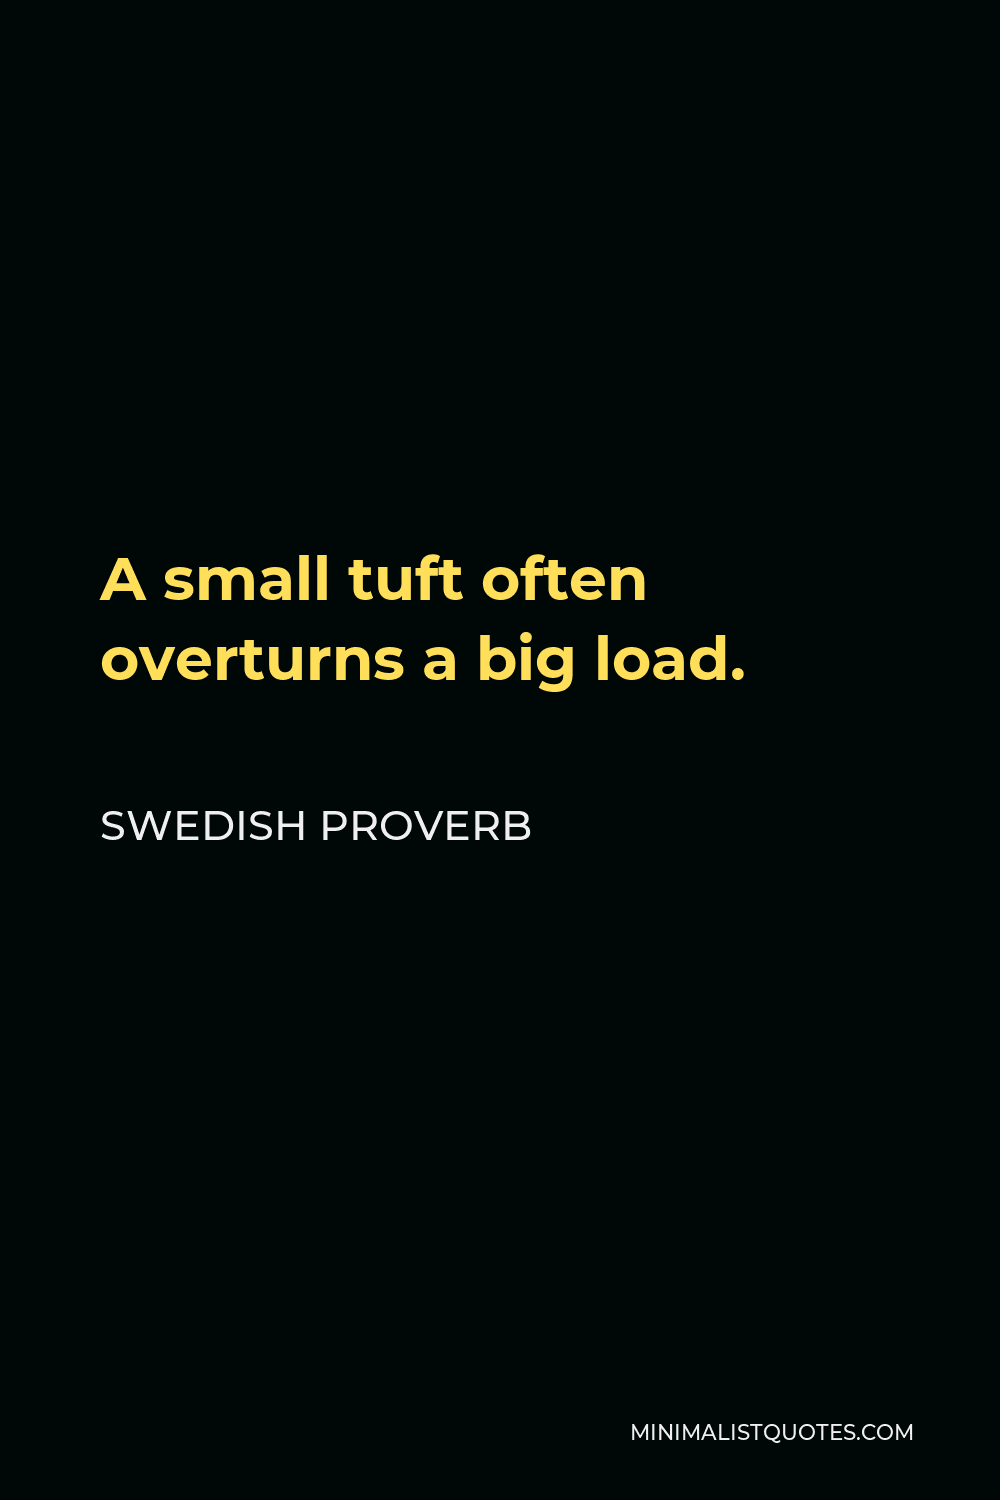 Swedish Proverb Quote - A small tuft often overturns a big load.